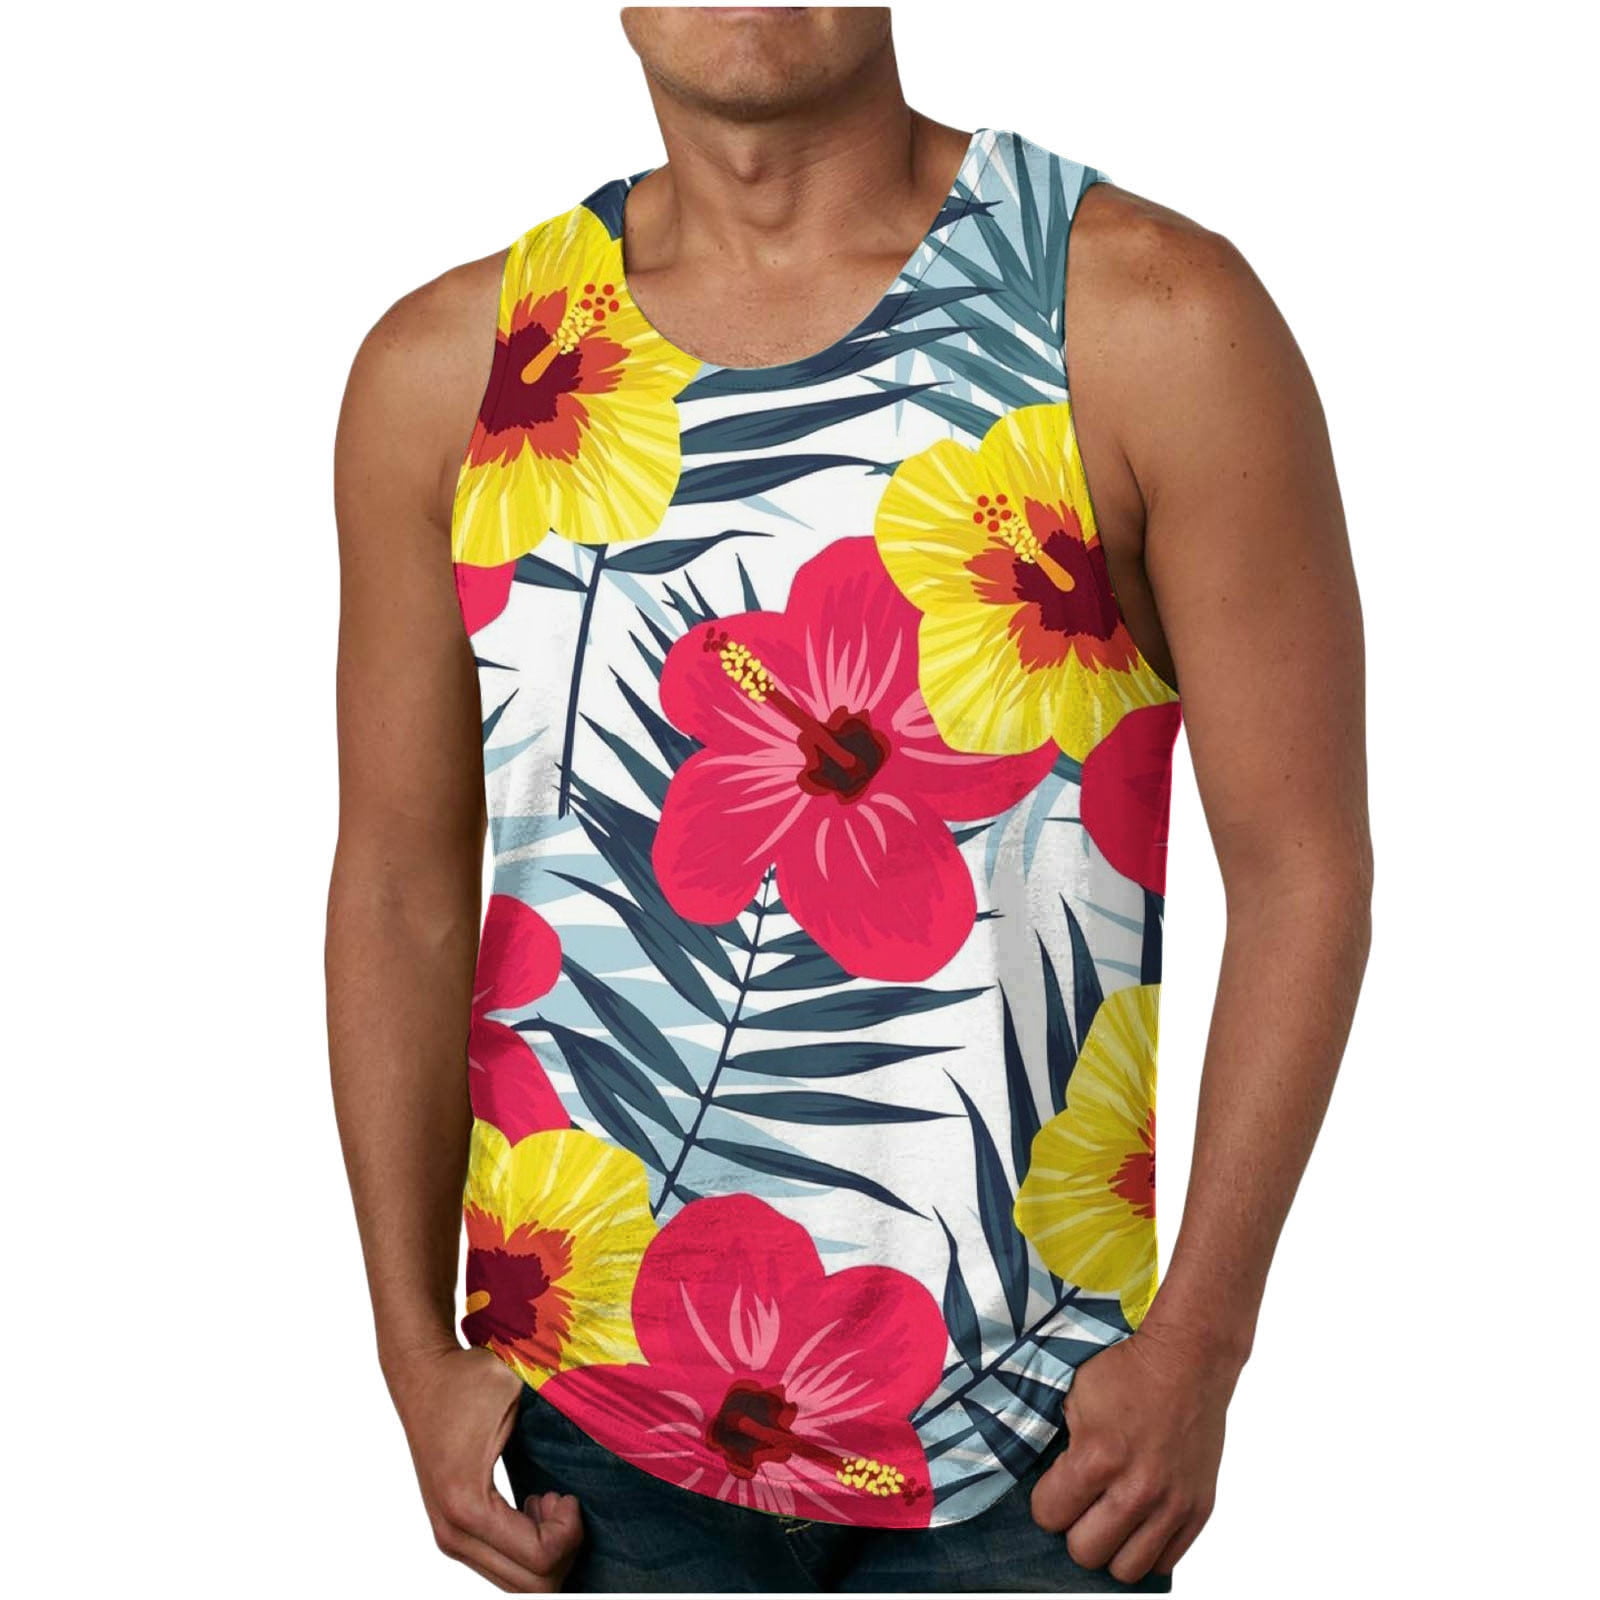 Cotonie Hawaiian Tanks Tops for Mens Printed Floral Graphic Sleeveless  Beach Tank Top Muscle Shirt for Workout Gym Jogging Vacation 